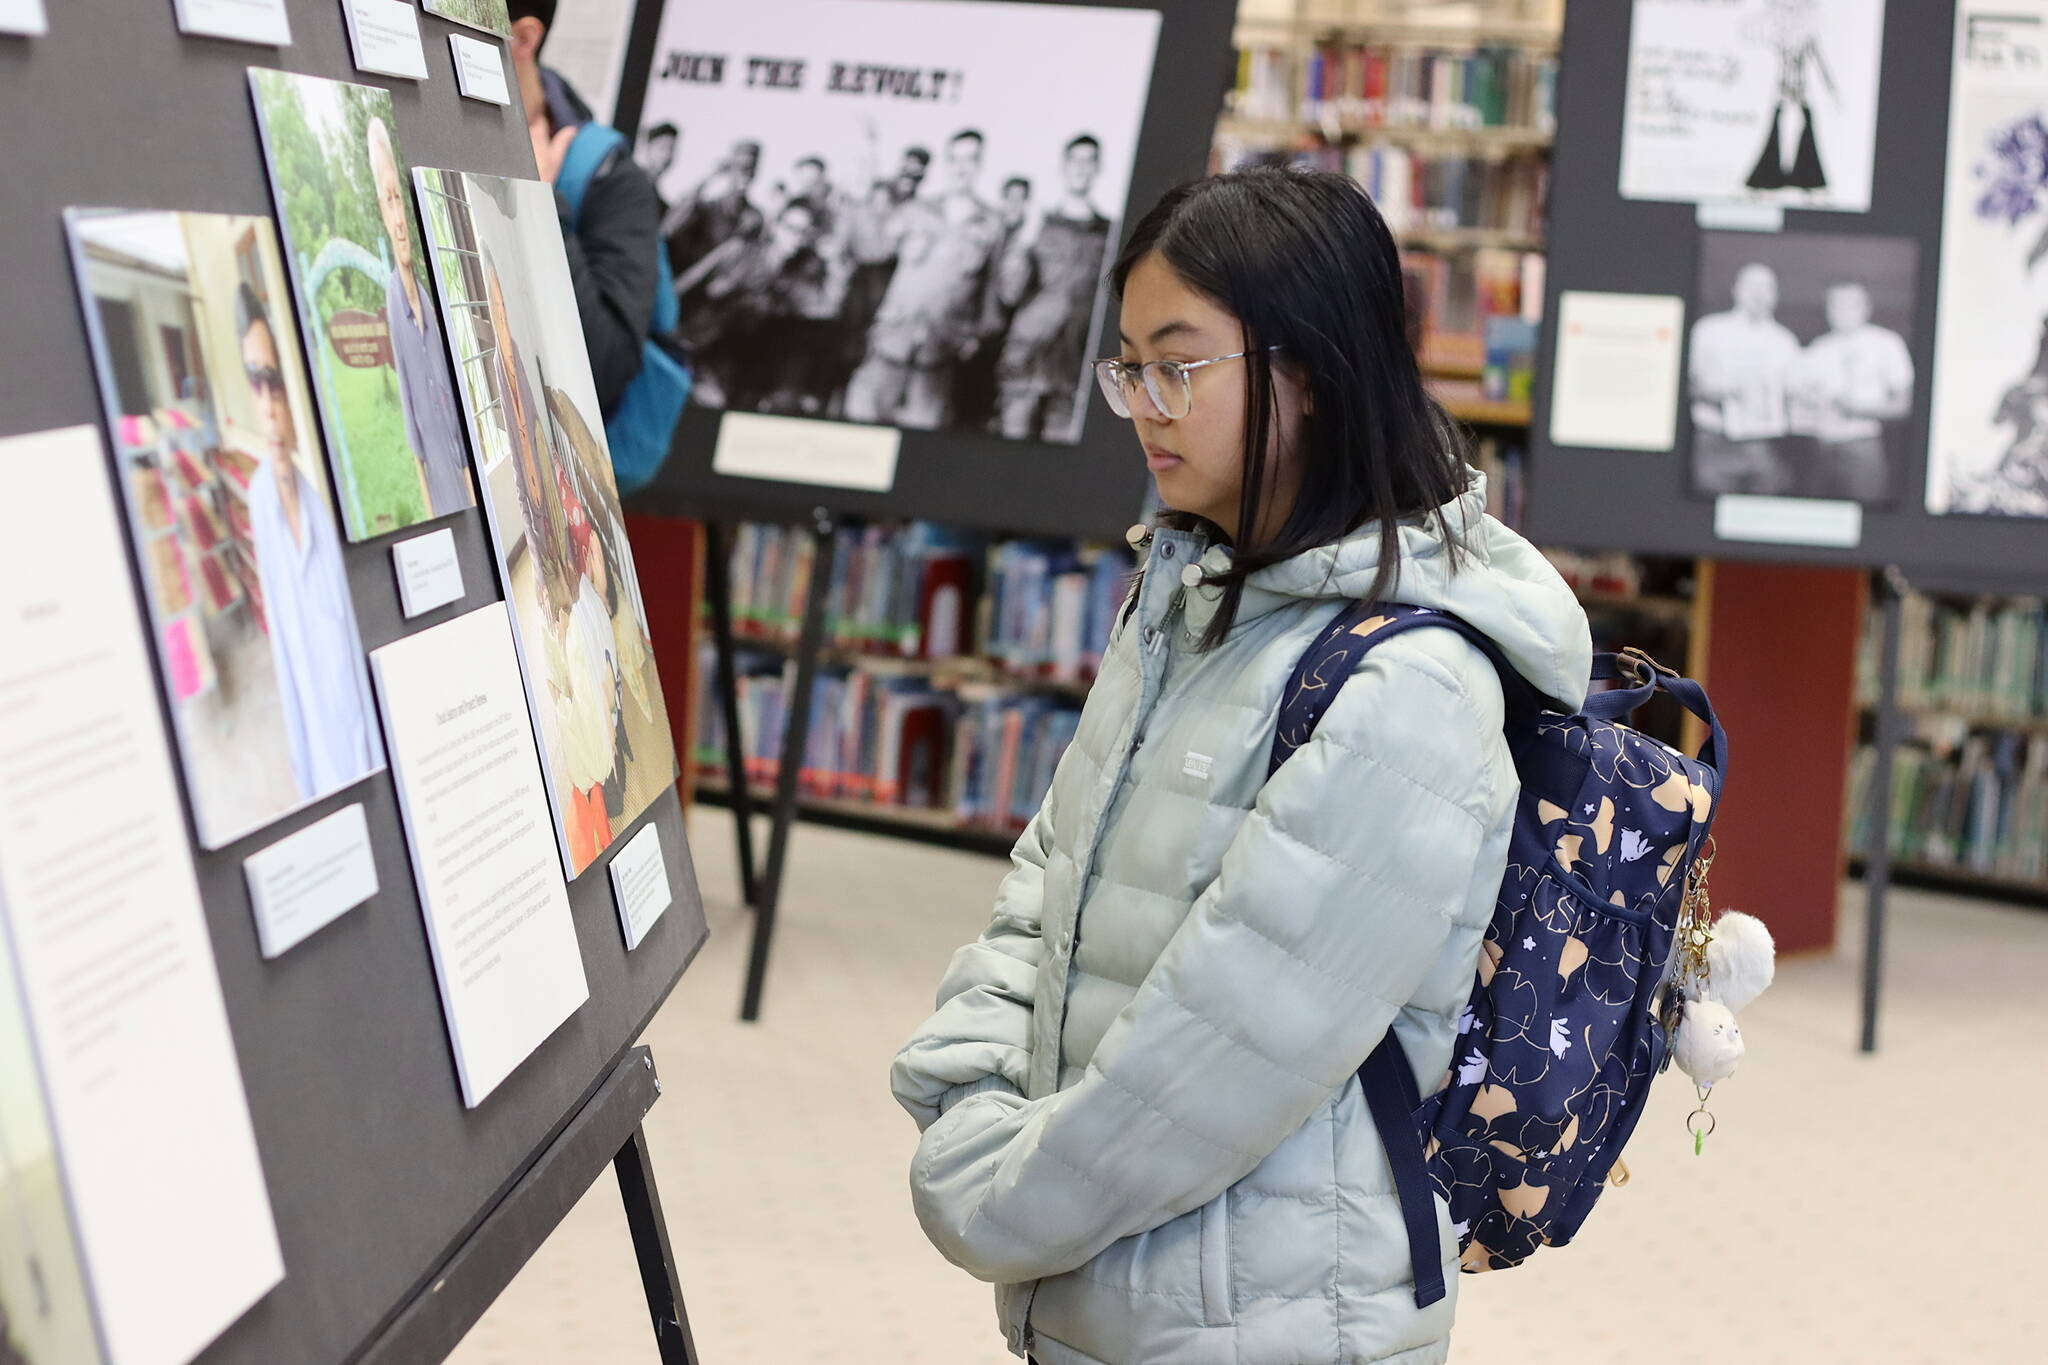 Mark Sabbatini / Juneau Empire 
Charlene Zanoria, a student at the University of Alaska Southeast, looks at part of the exhibit “Waging Peace In Vietnam: The Story of U.S. Soldiers and Veterans Who Opposed the War” during a preview event Thursday in the university’s library. The exhibit will officially be open from Friday through Dec. 15.